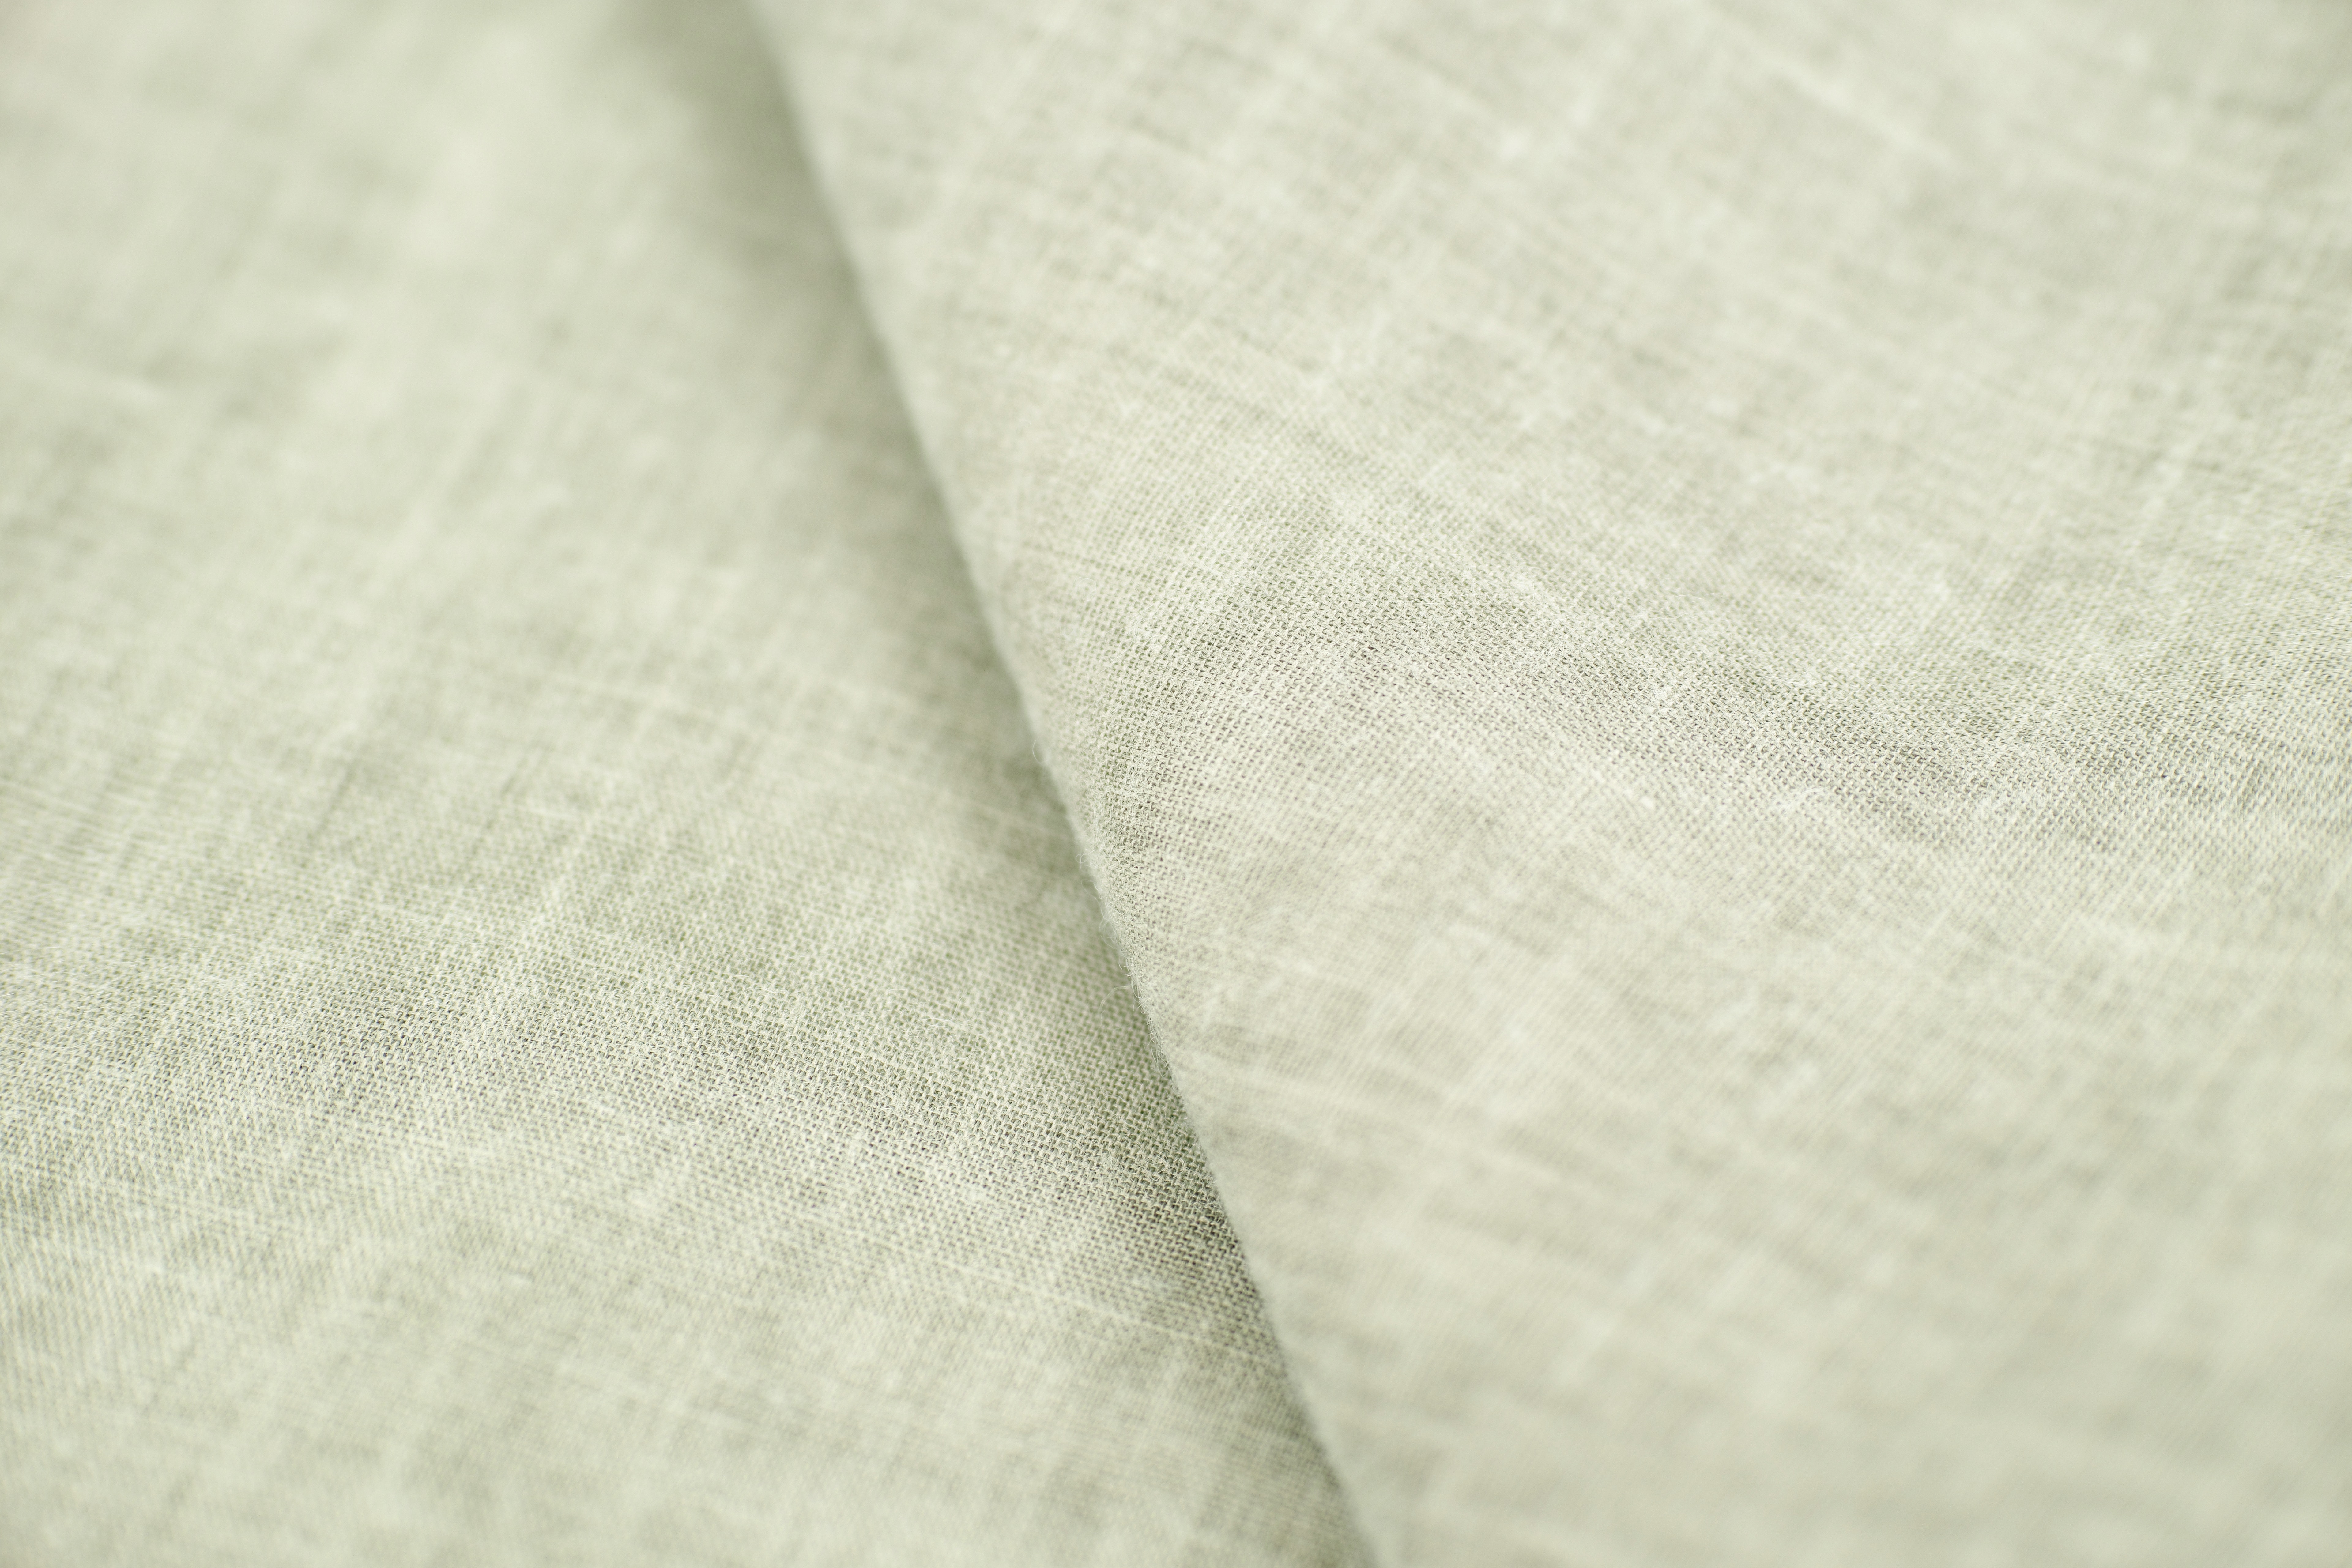 Season SS - Protagonist the of Linen: The Fabric Cadini